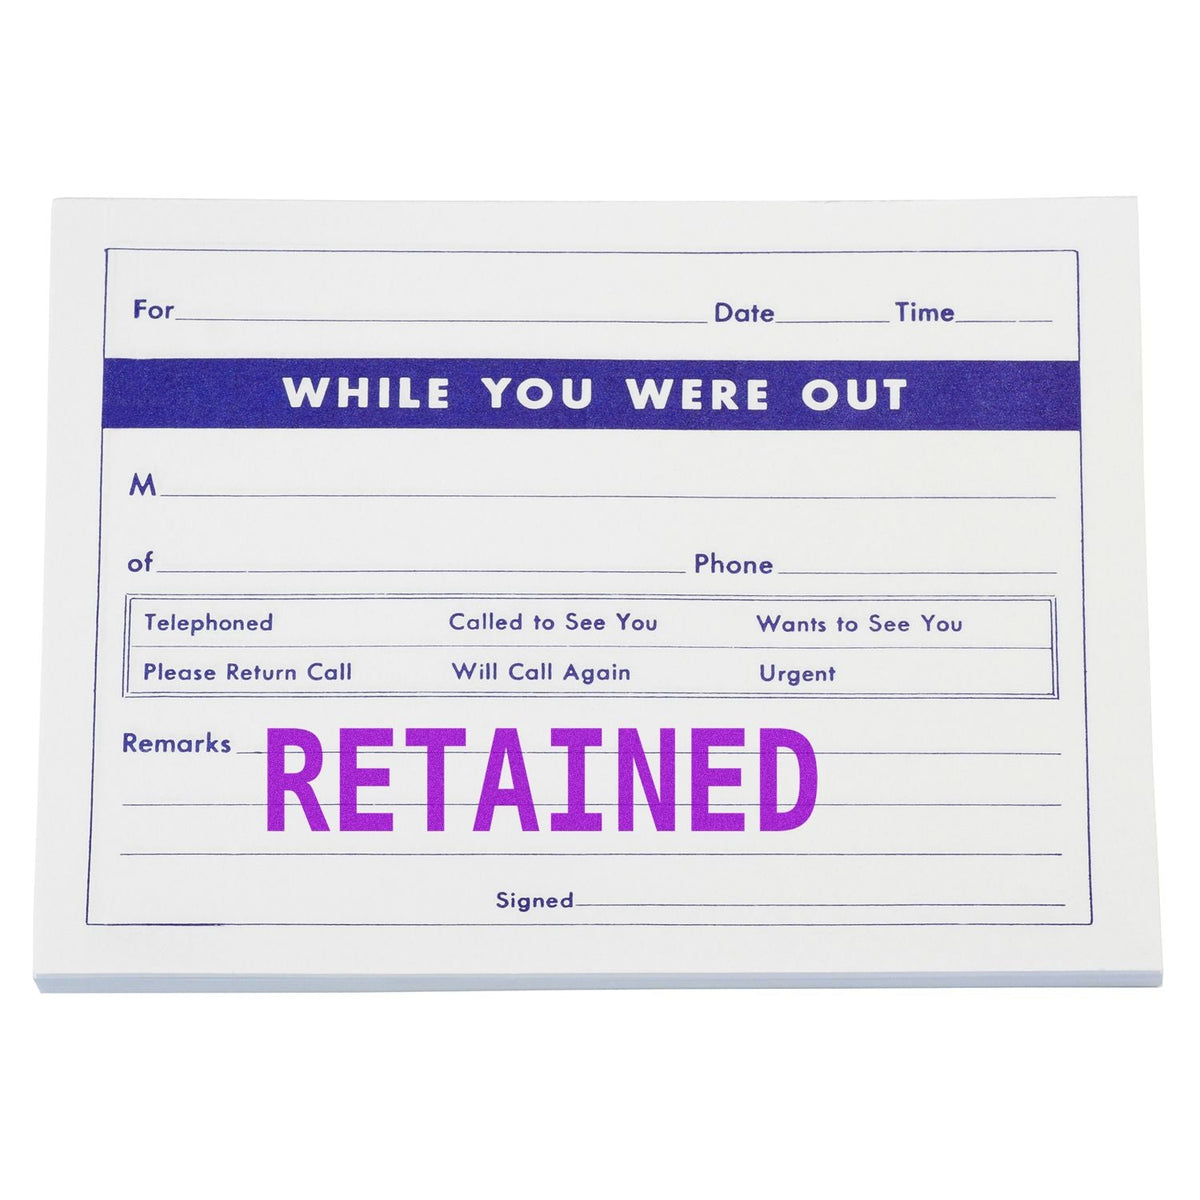 Self Inking Retained Stamp In Use